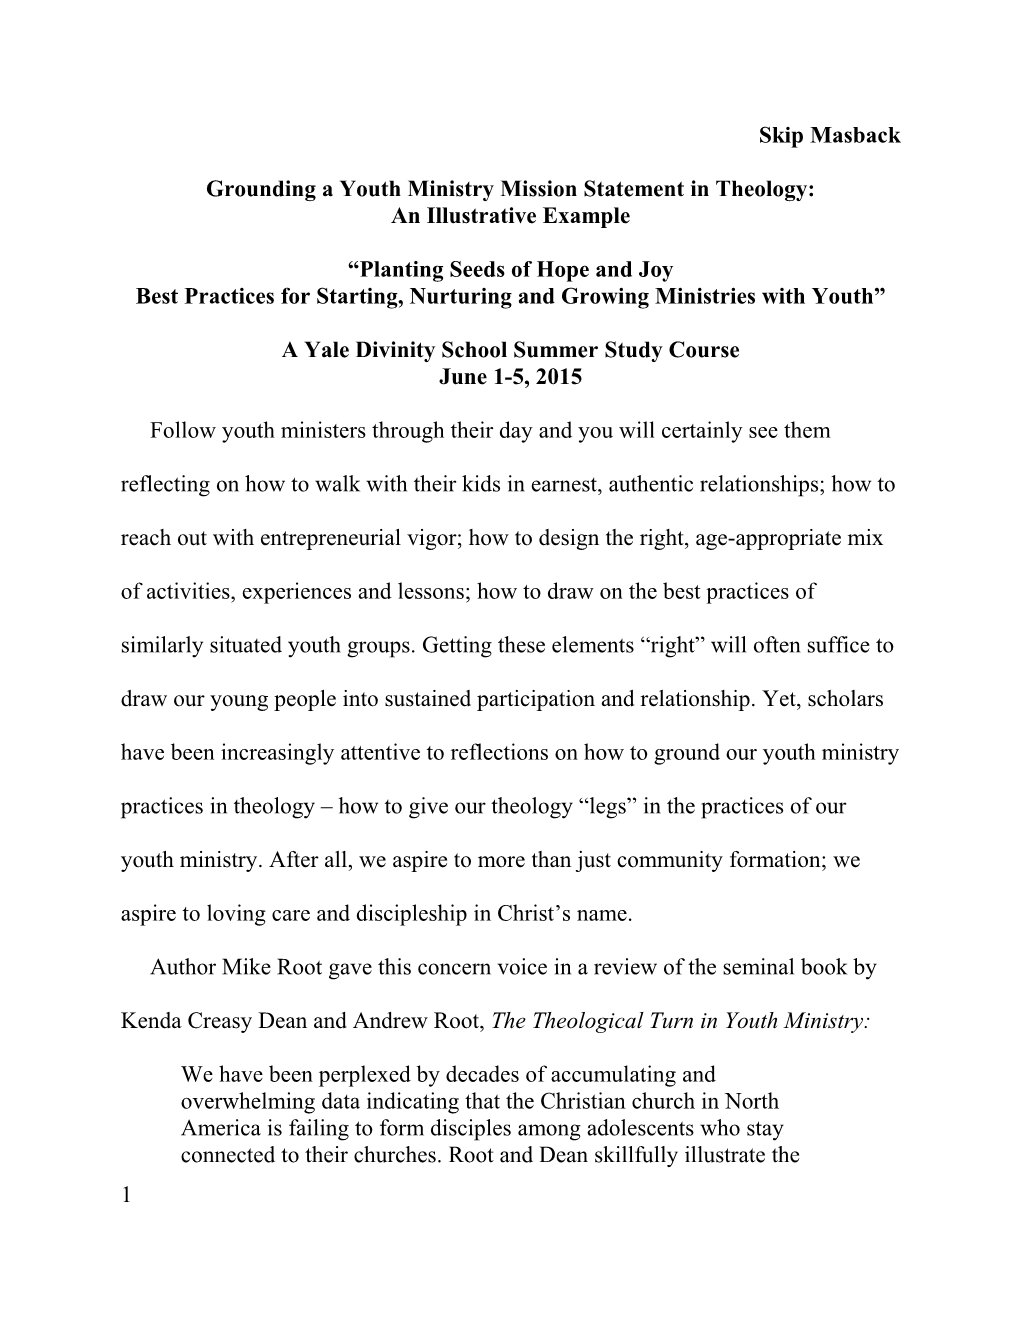 Grounding a Youth Ministry Mission Statement in Theology